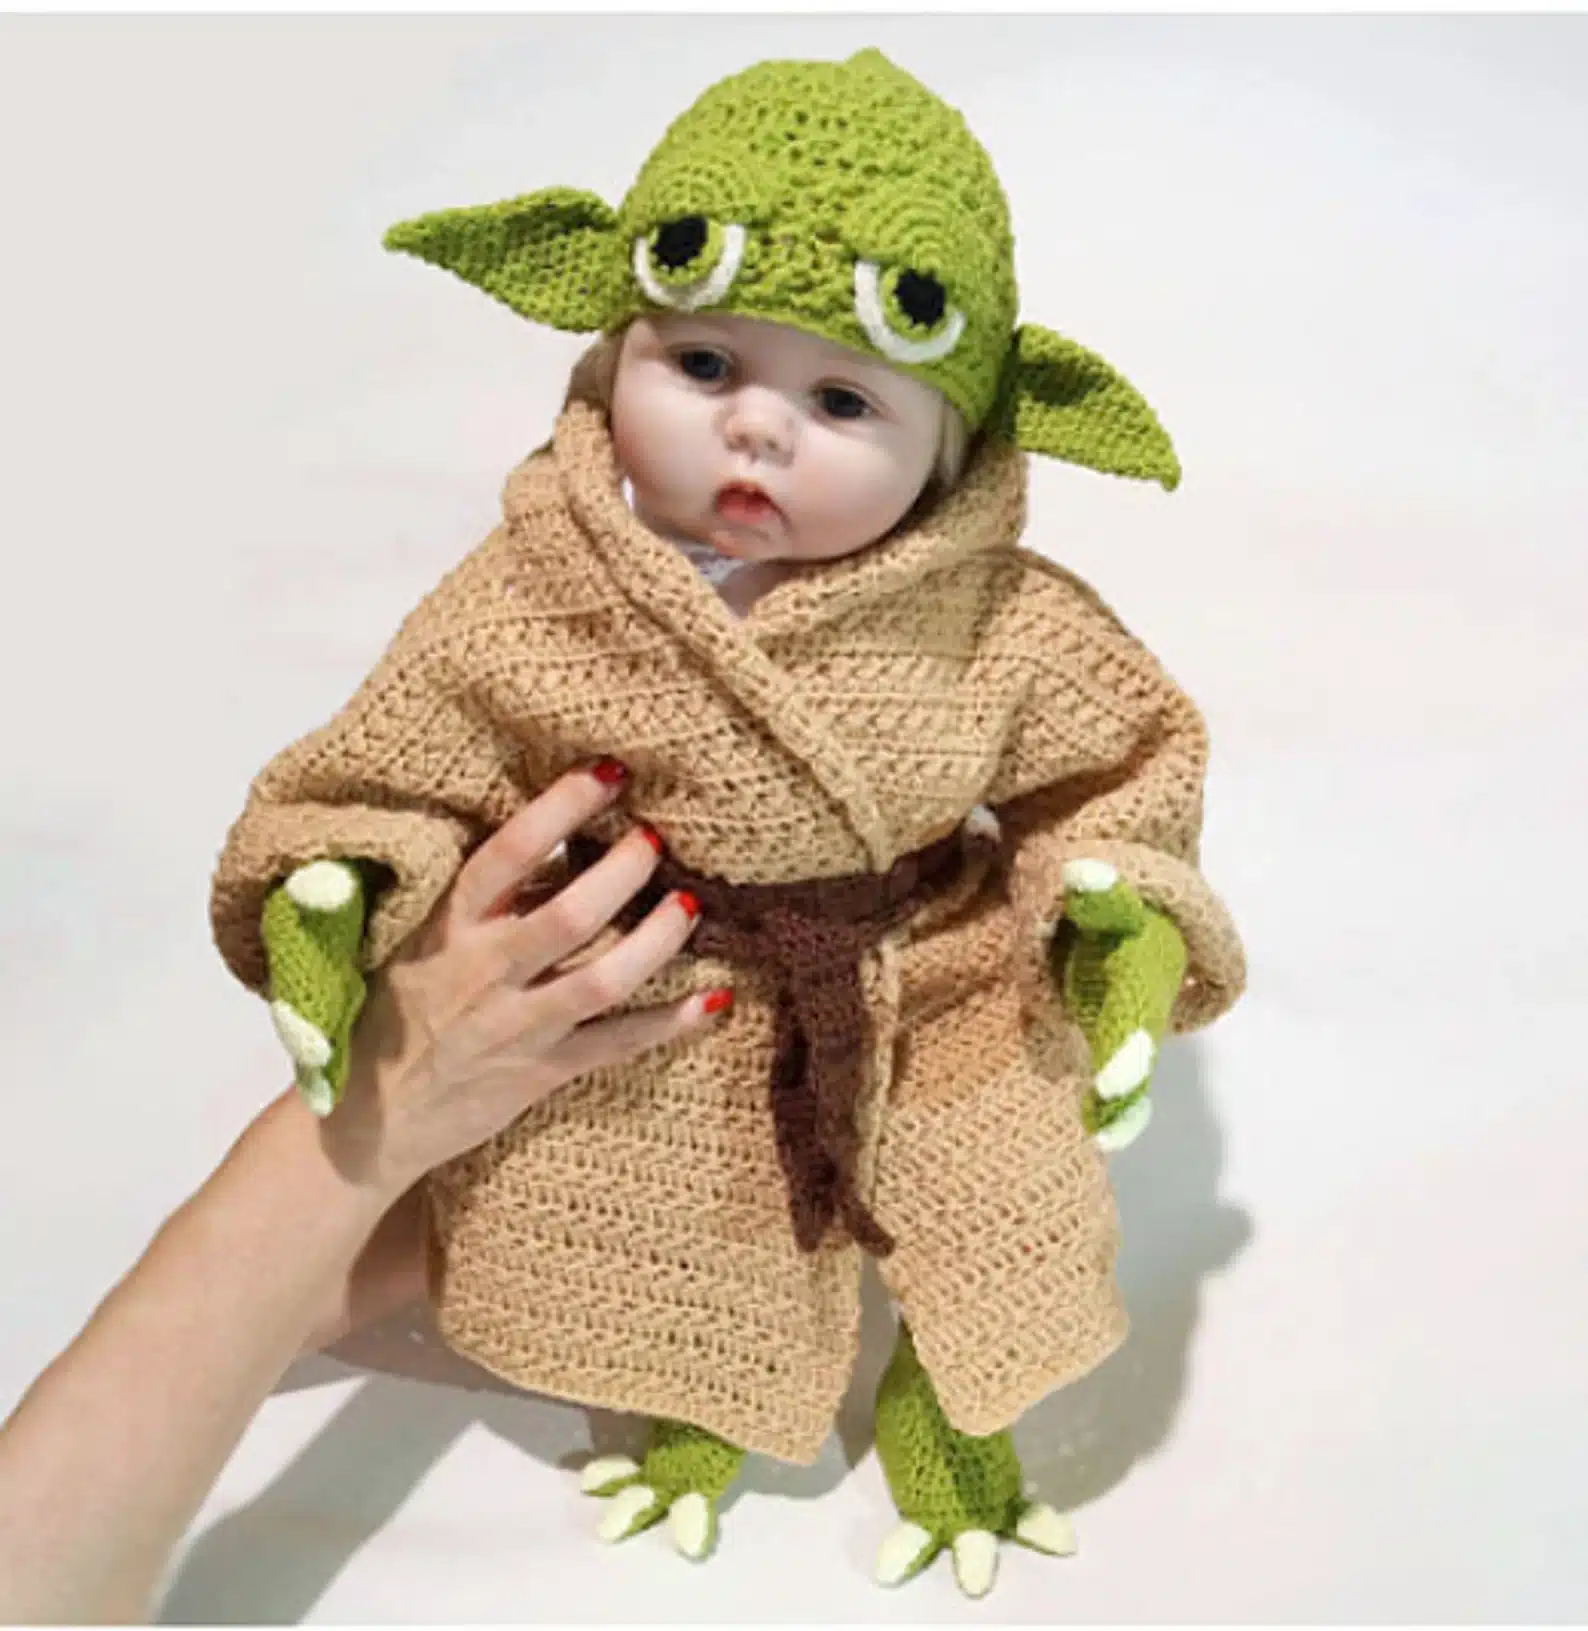 Star Wars Outfit Baby Costume